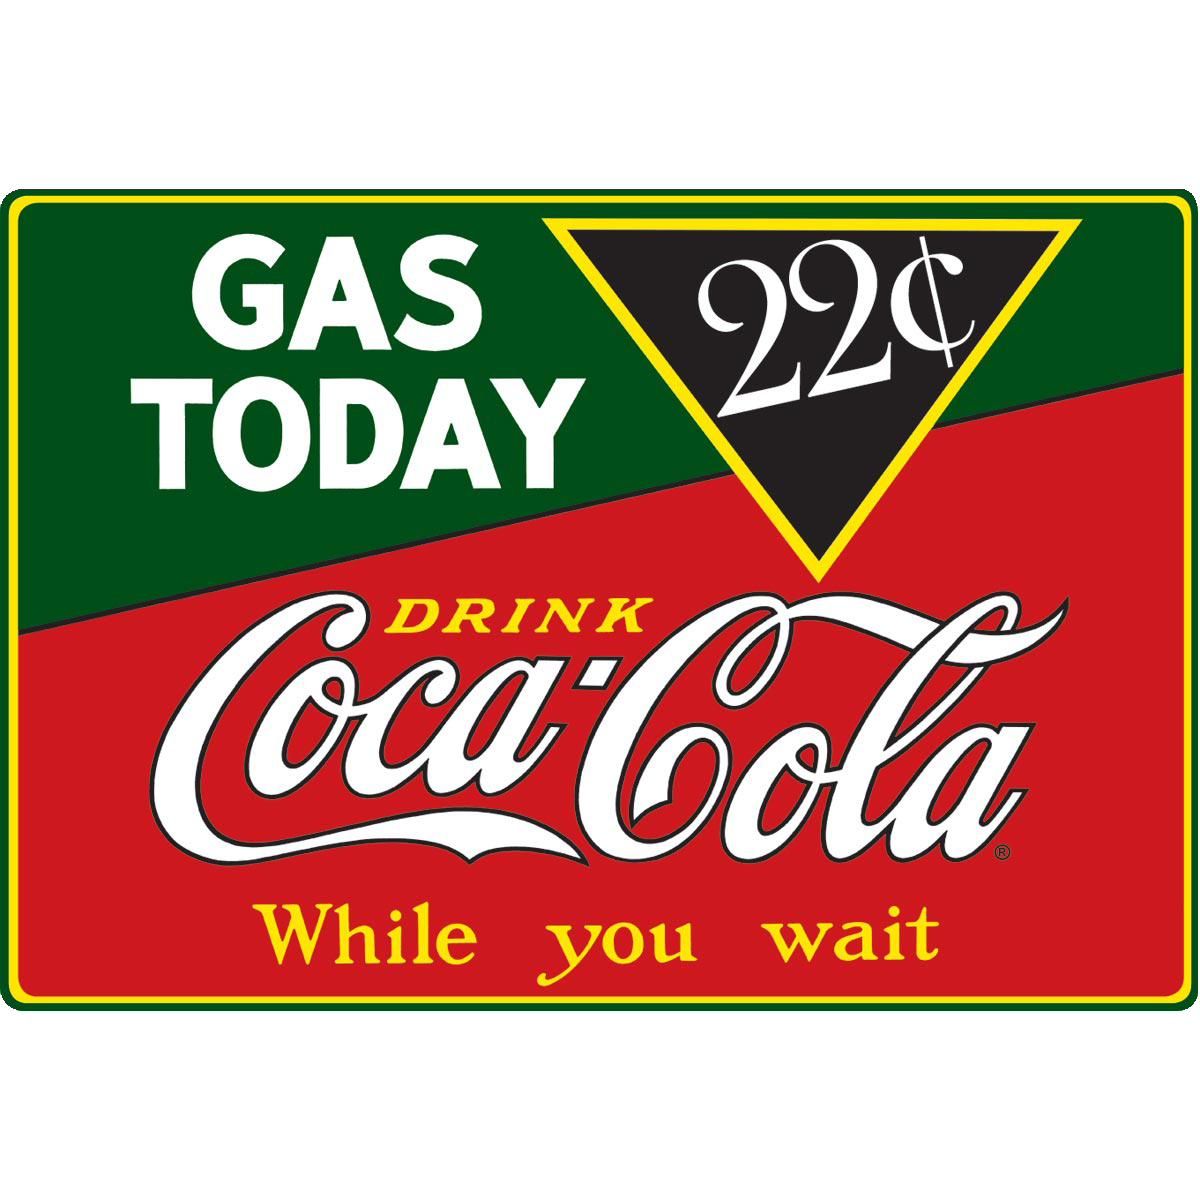 Vintage styled Coca-Cola sign indicating "Gas Today at 22¢" with "Drink Coca-Cola While you wait" in bold red background.